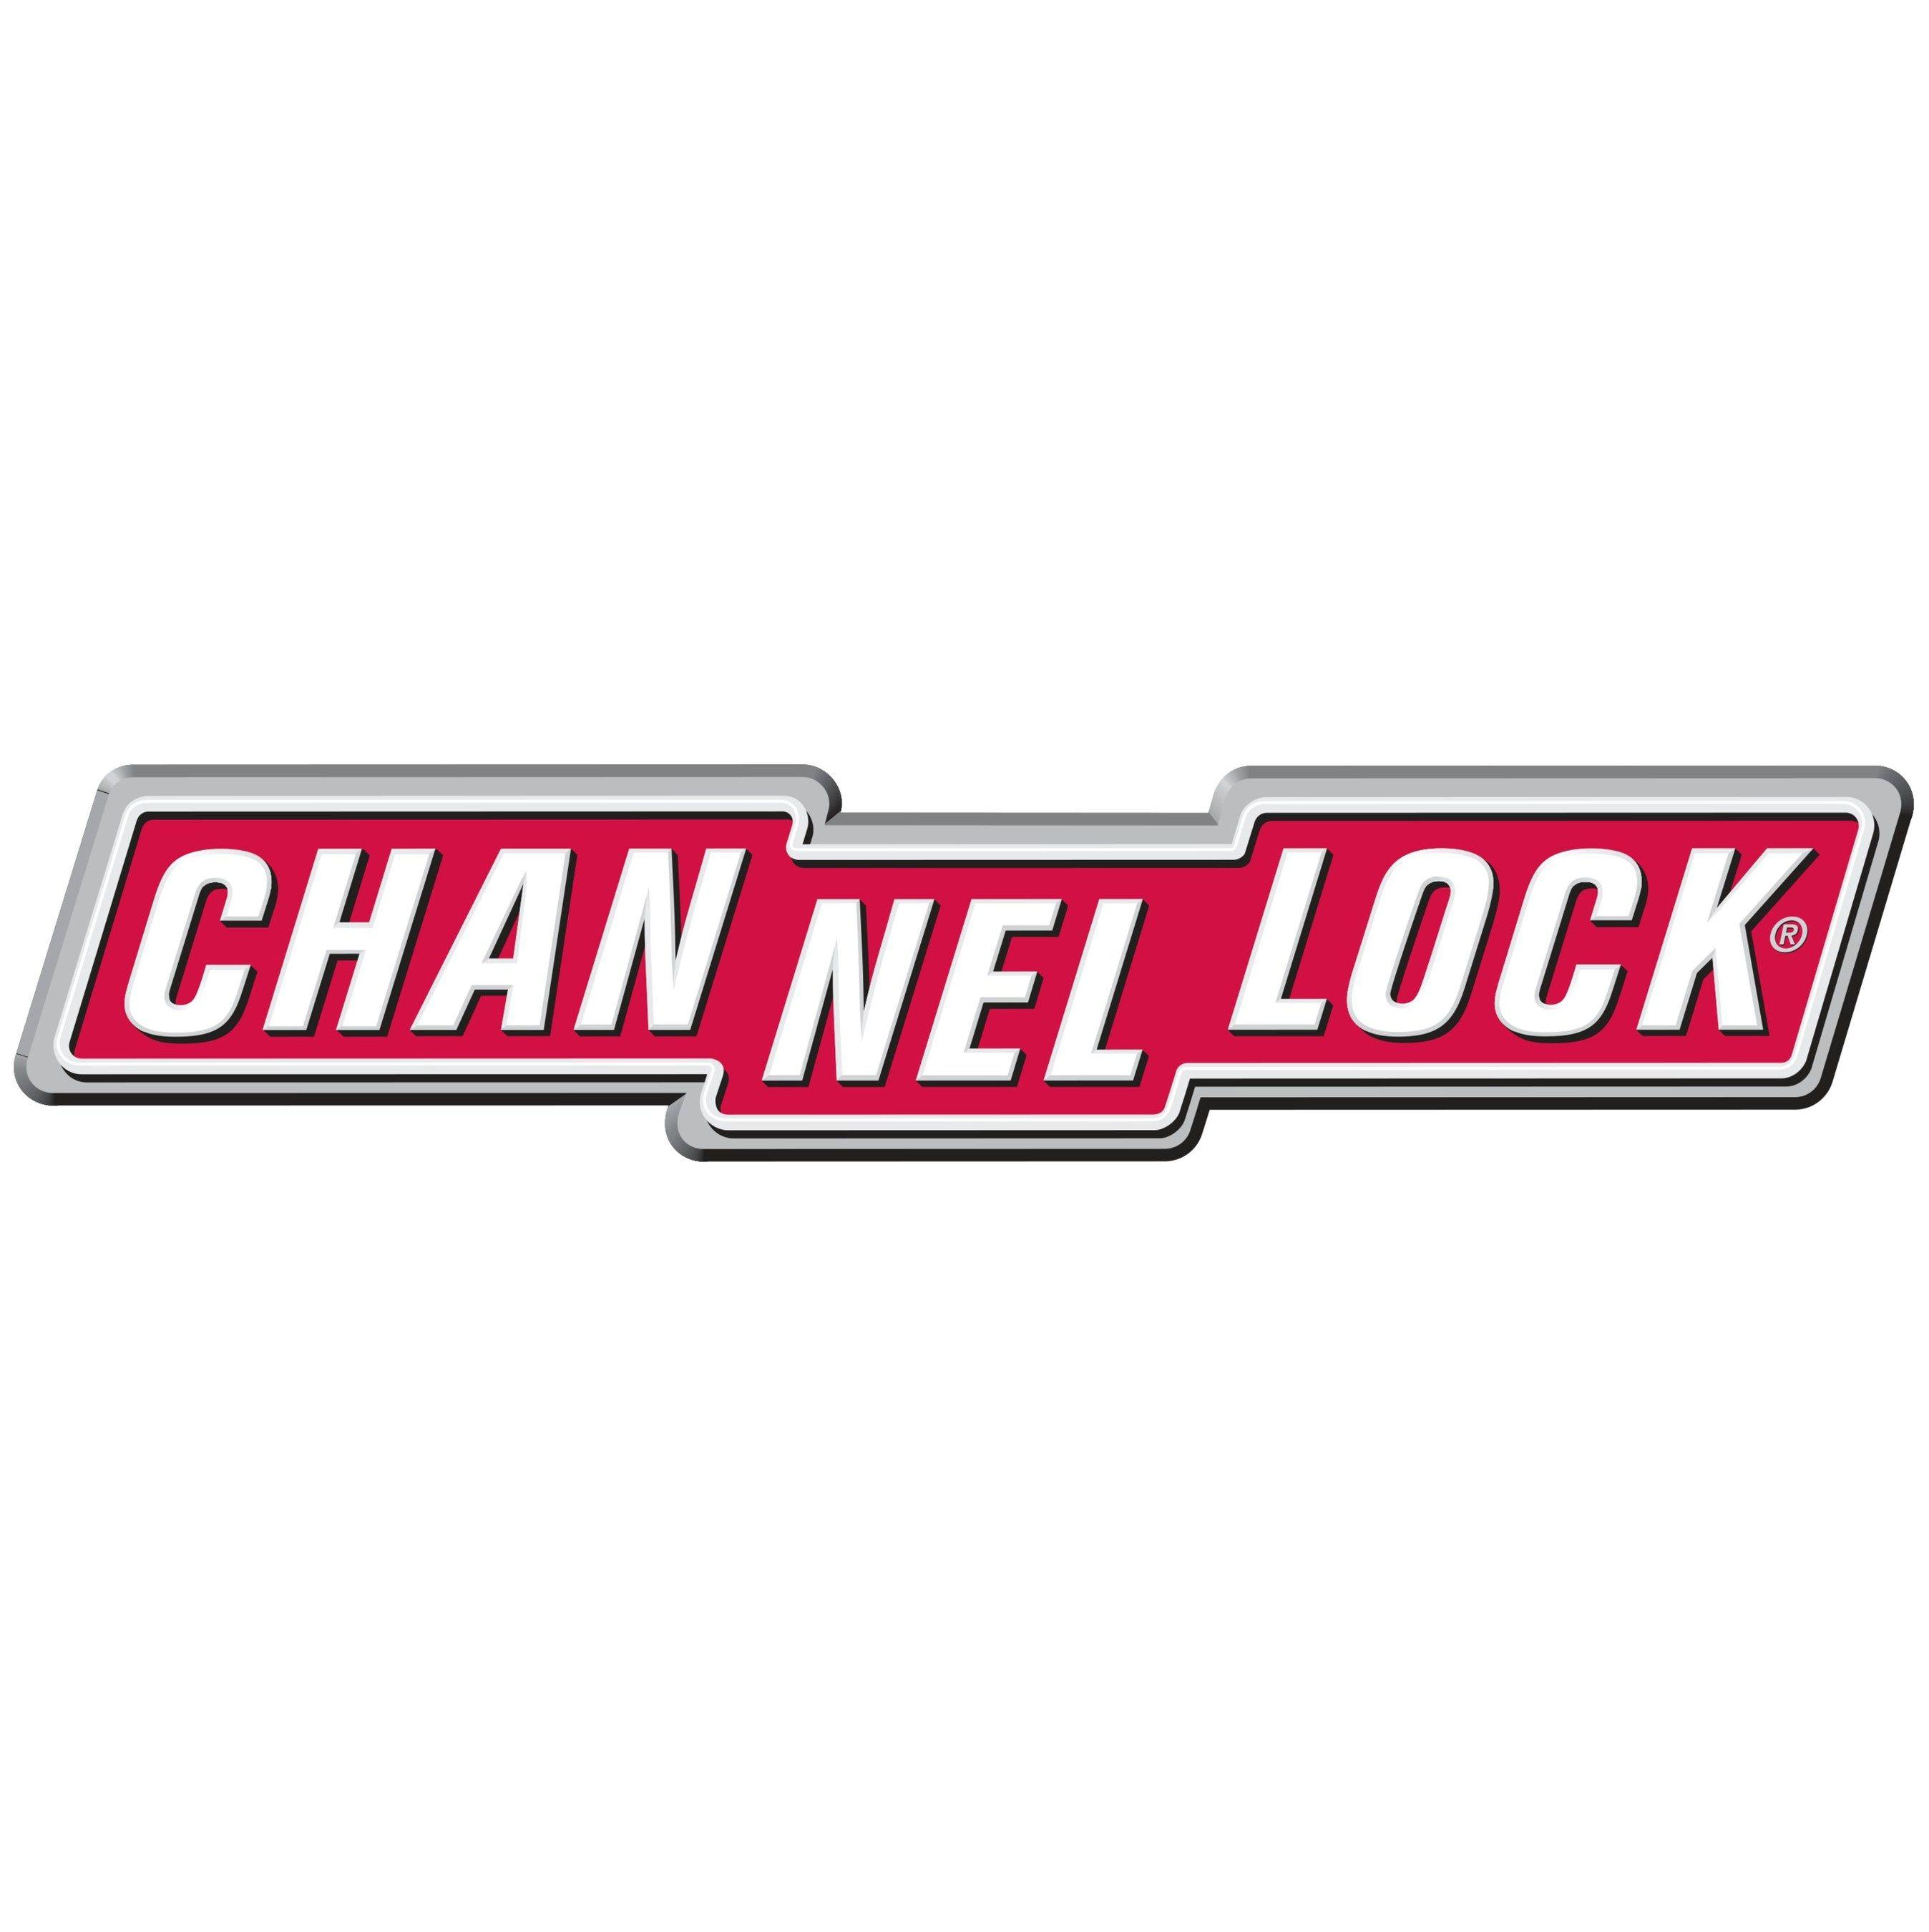 Channellock Logo - Channellock® Announces 2019 Trade School Trade Up Competition